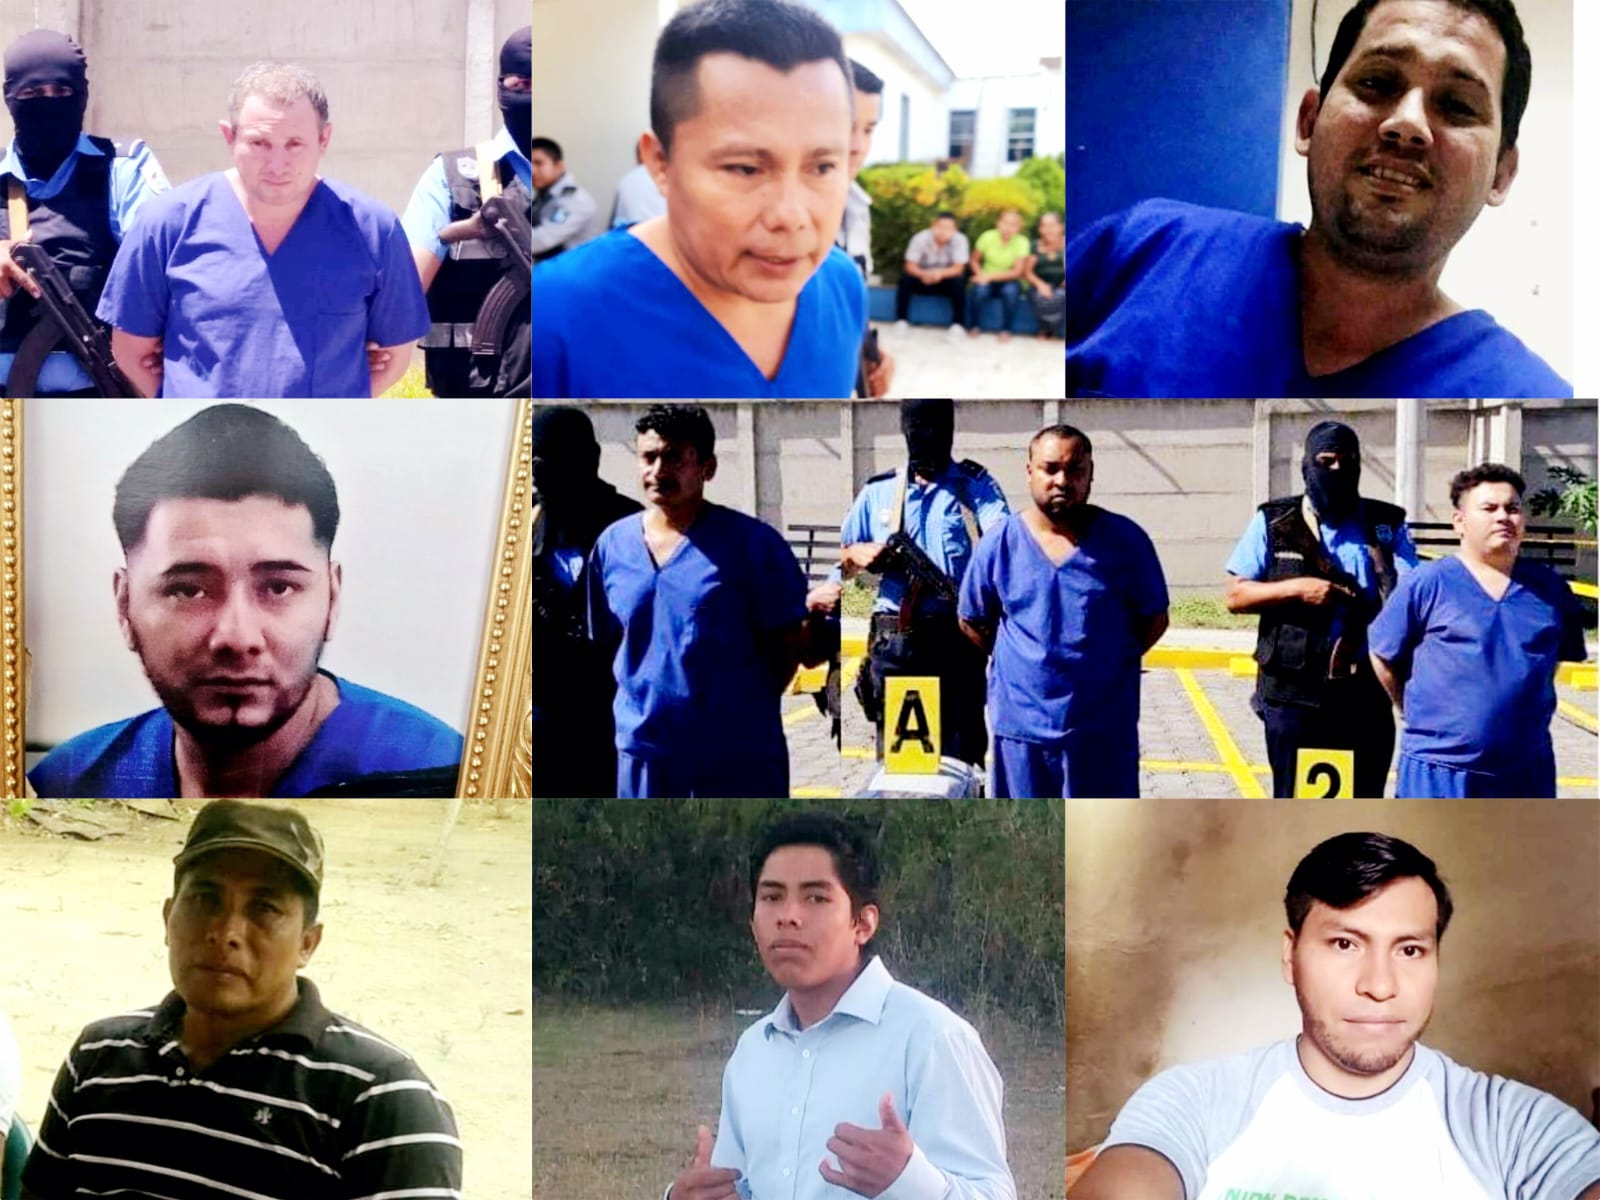 These are the political prisoners of Masaya who will serve four years in prison